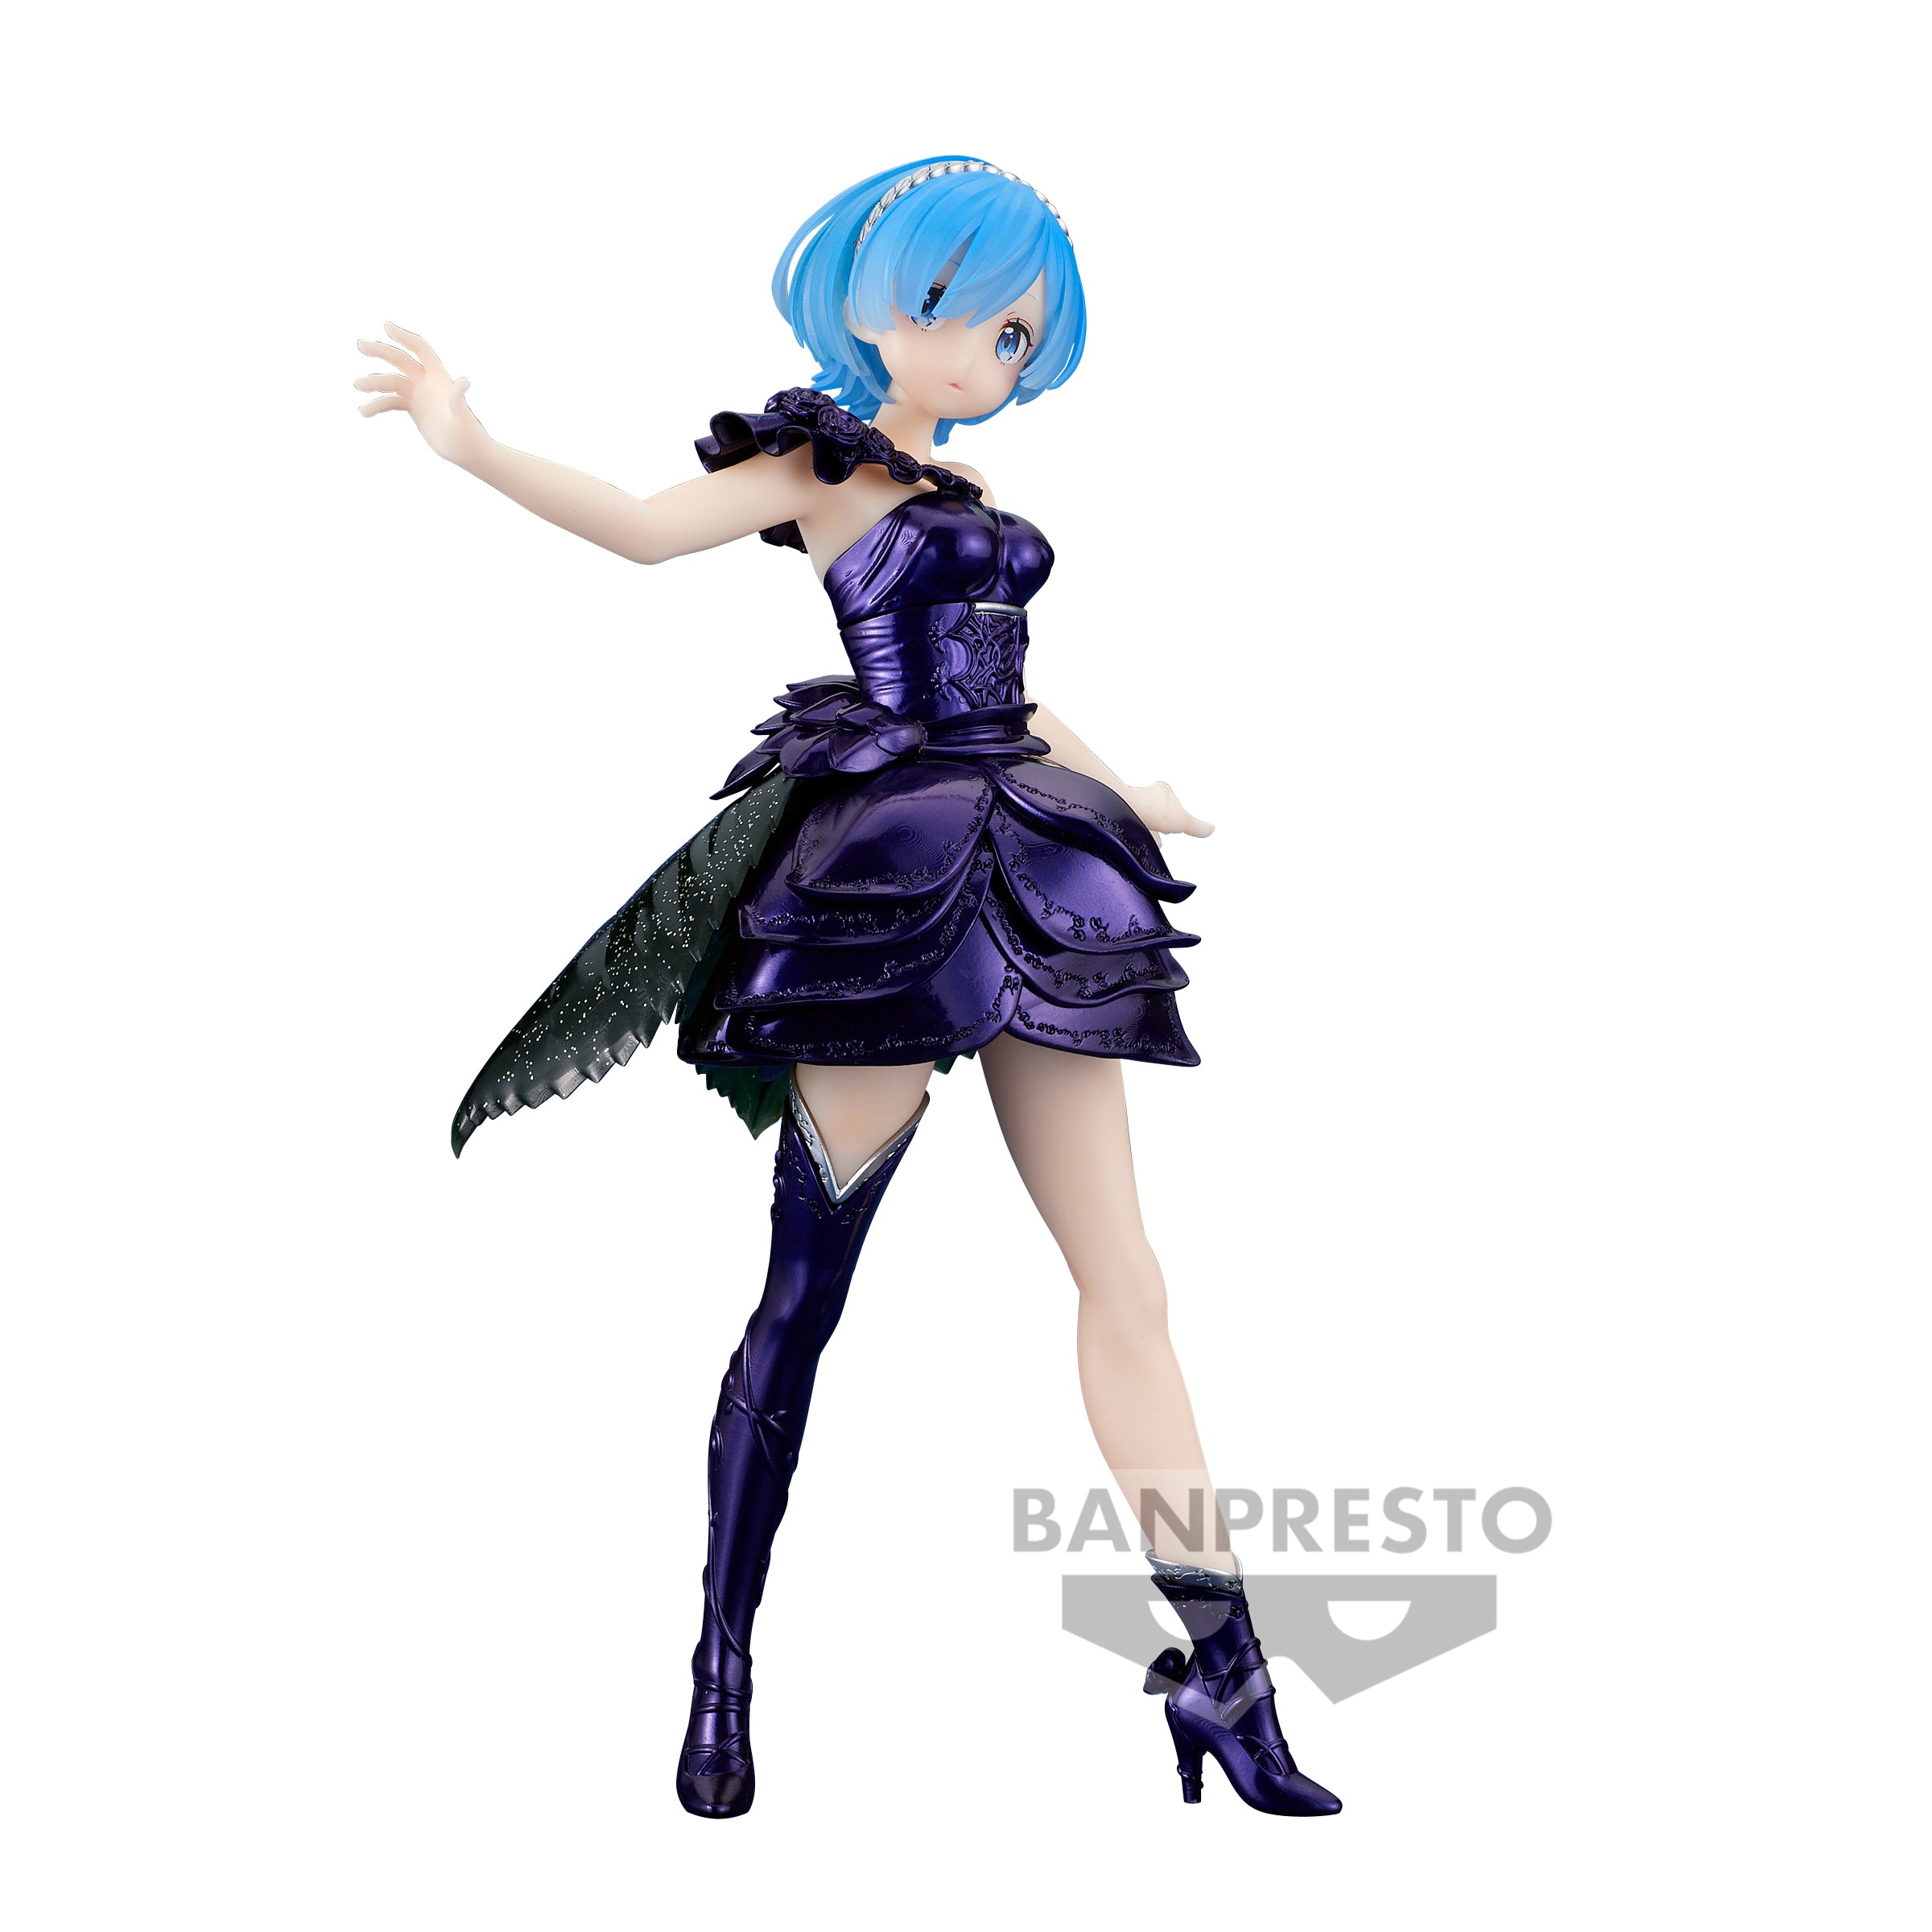 Re:Zero - Starting Life In Another World - Dianacht Couture - Rem -